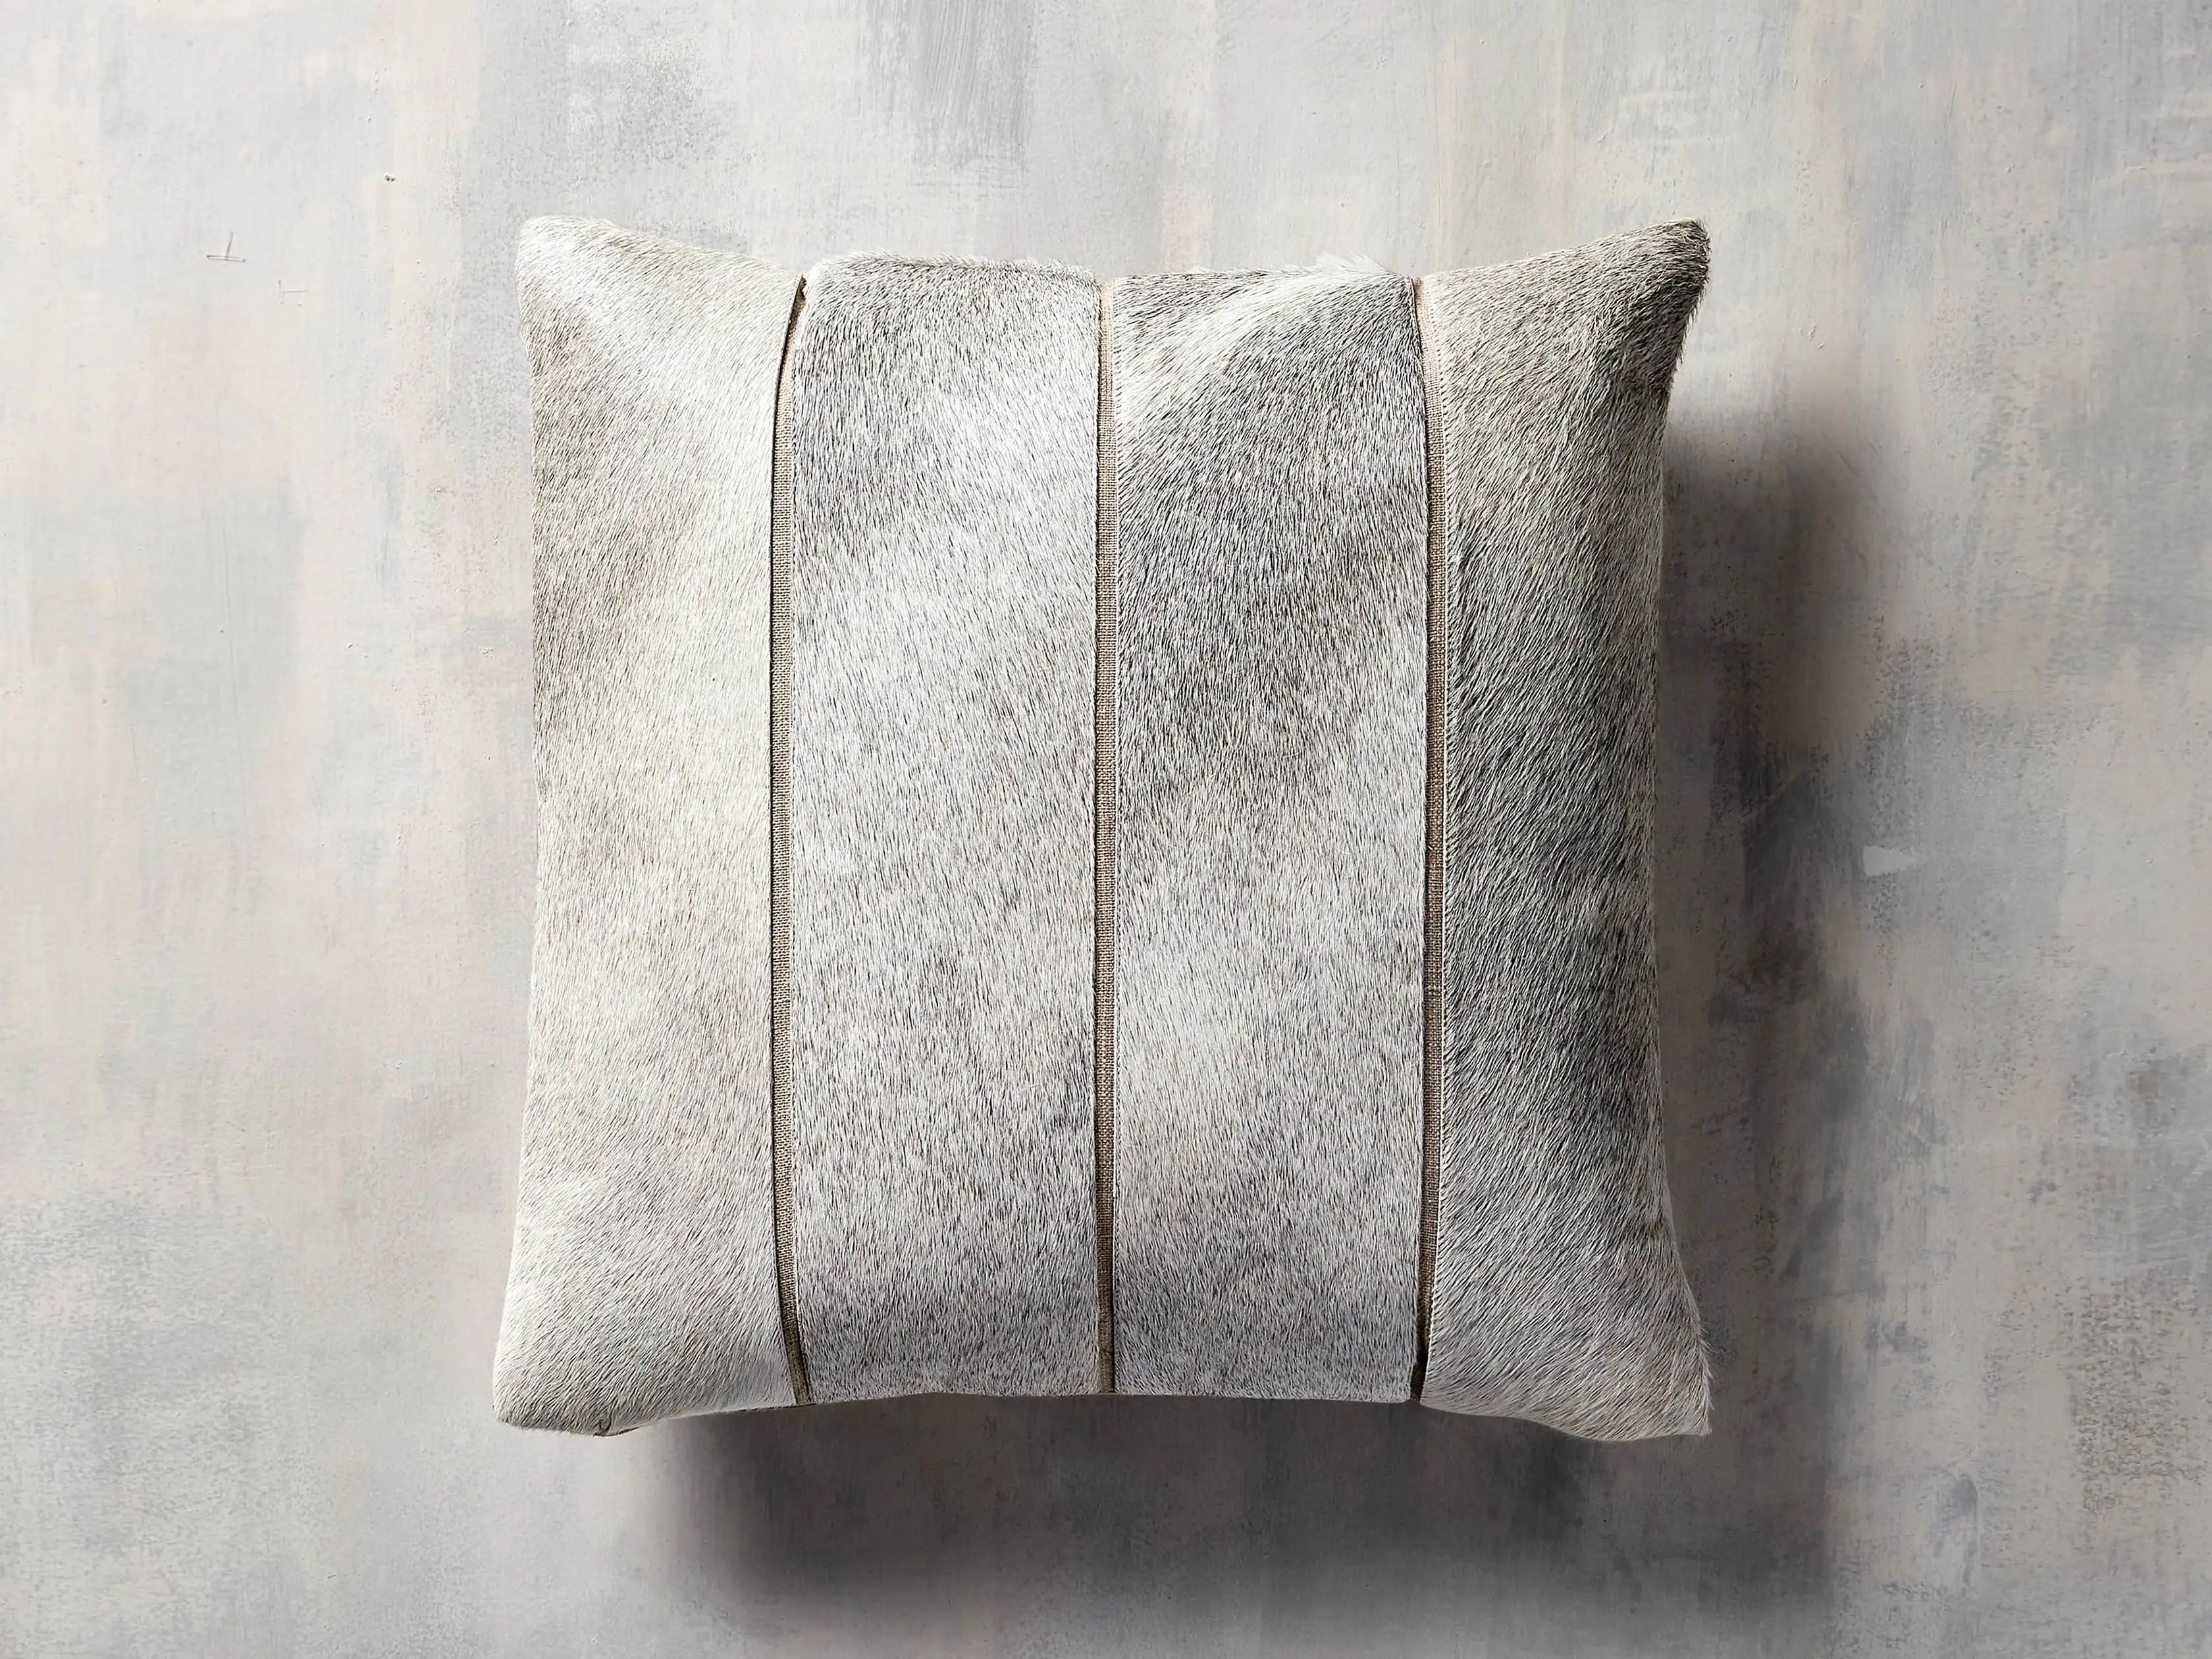 Channel-Stitch Hide Pillow Cover | Arhaus